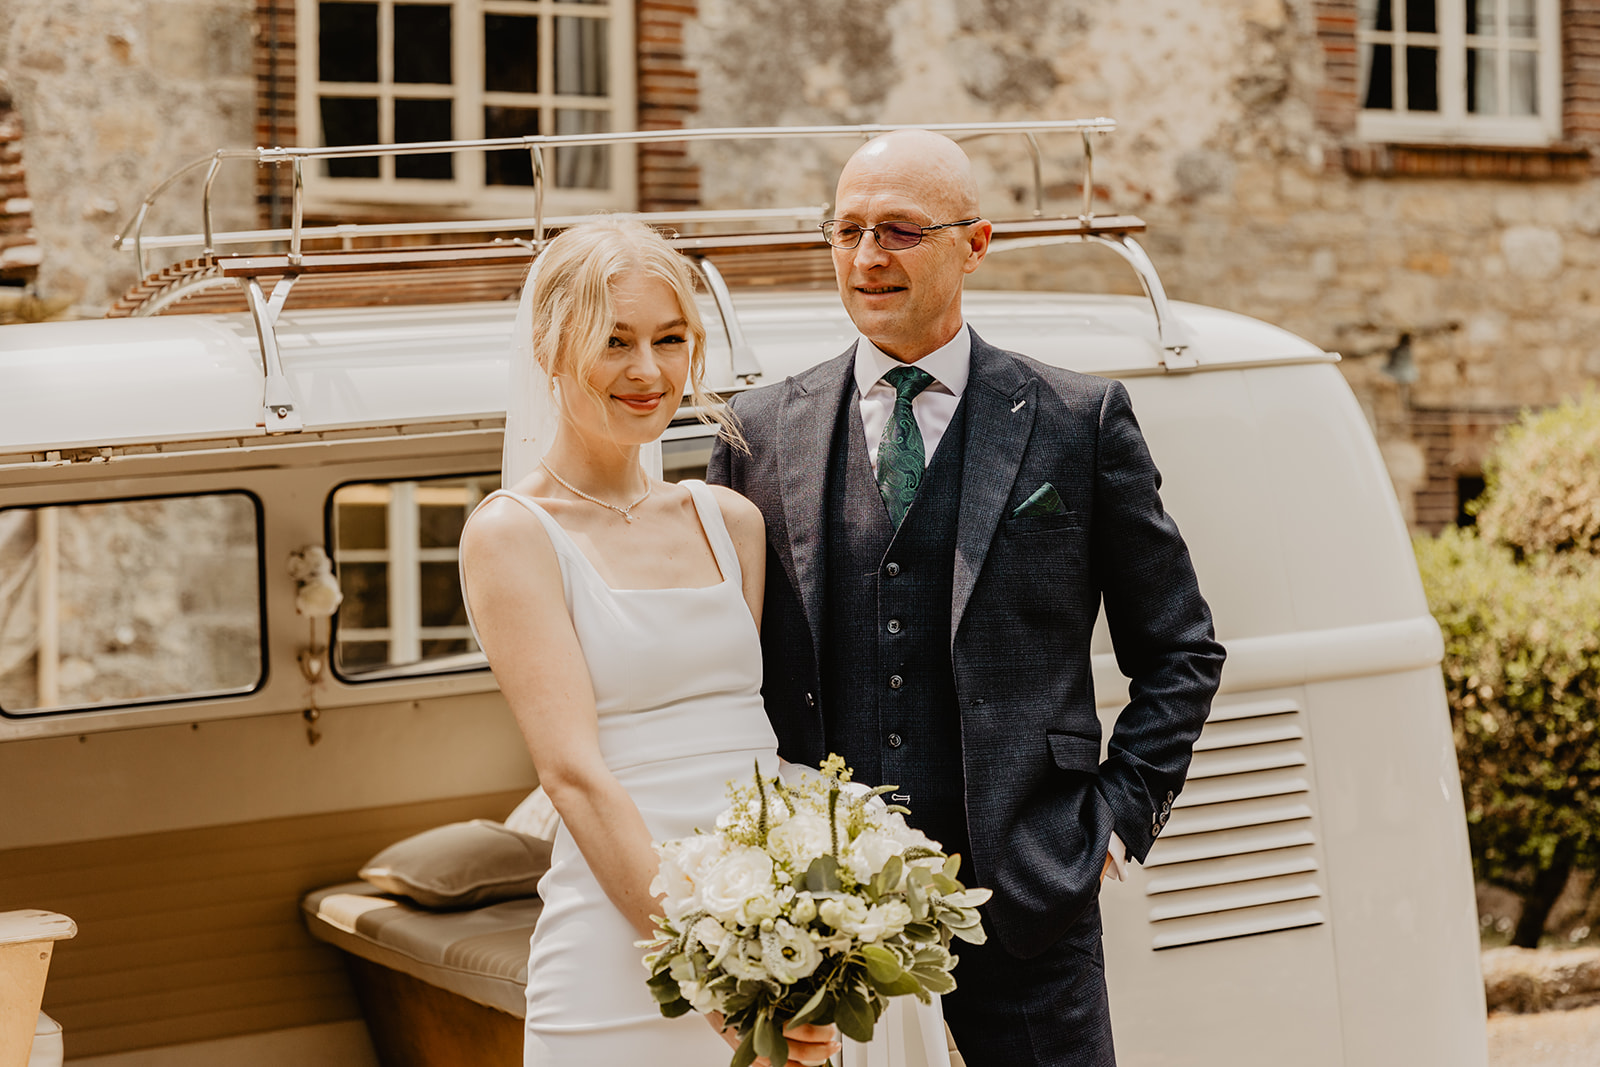 Bride and father by VW camper at a Bury Manor Barn Wedding in Sussex. Photographer OliveJoy Photography.